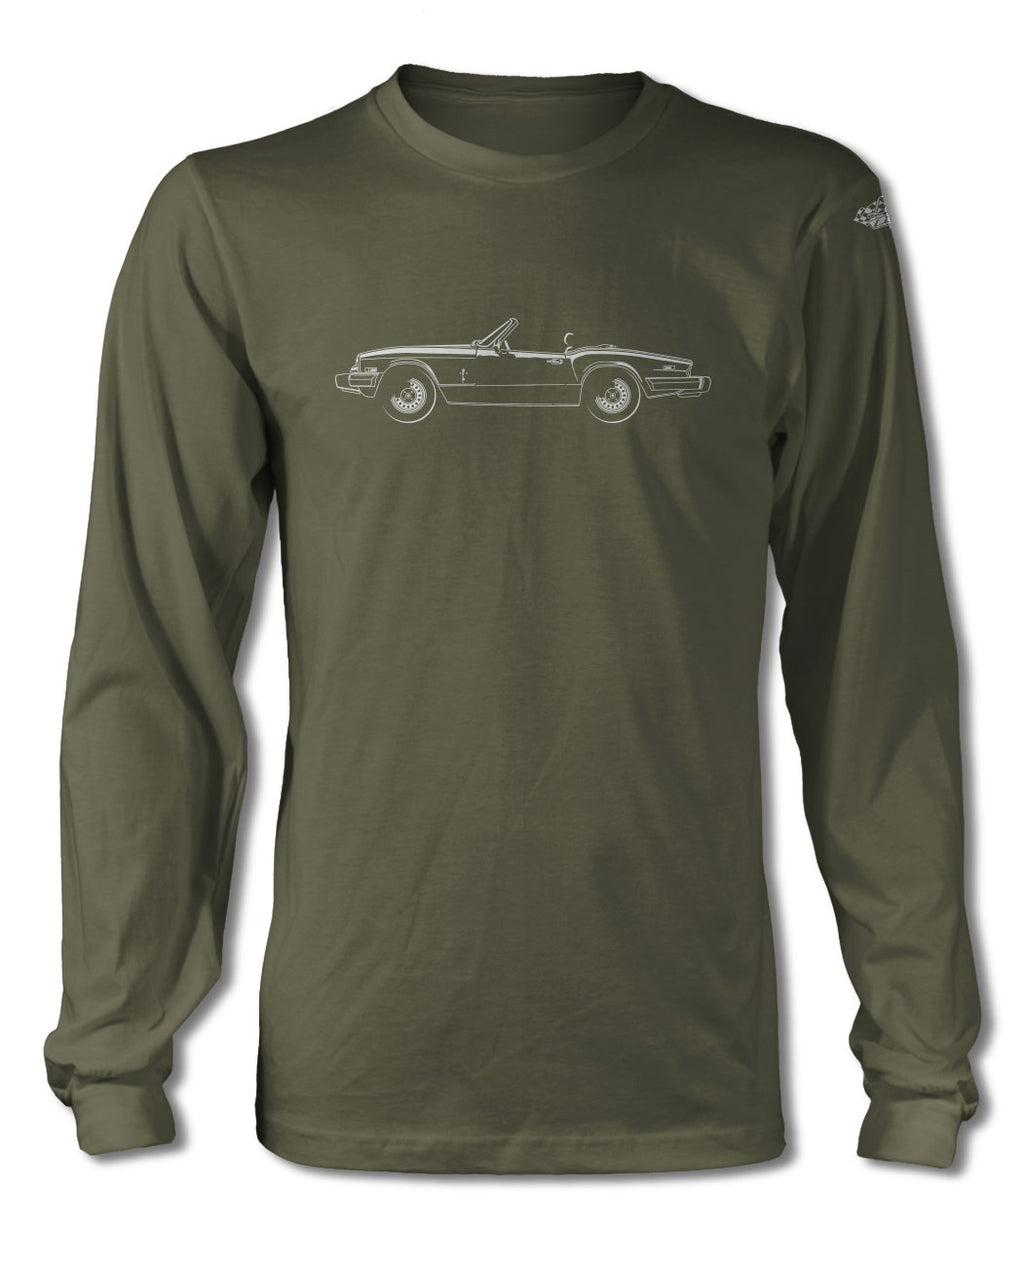 Triumph Spitfire 1500 S2 Convertible T-Shirt - Long Sleeves - Side View